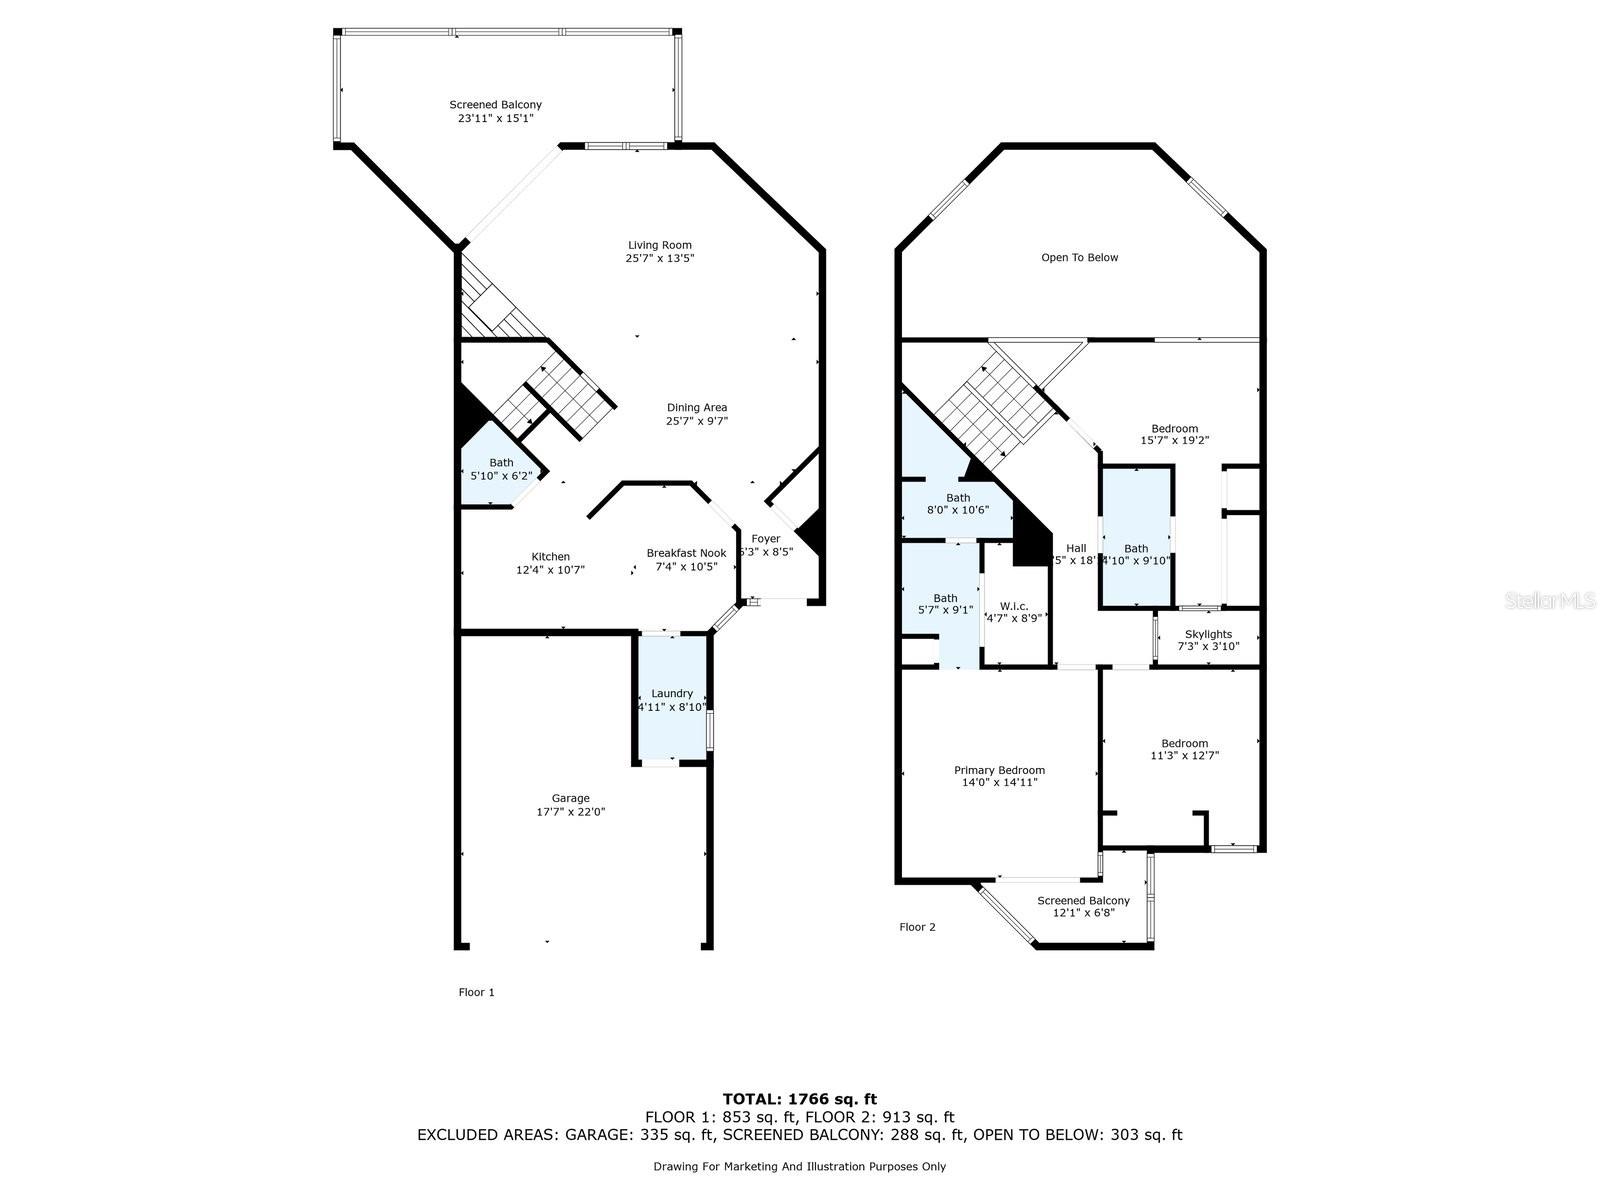 Floor plan with dimension